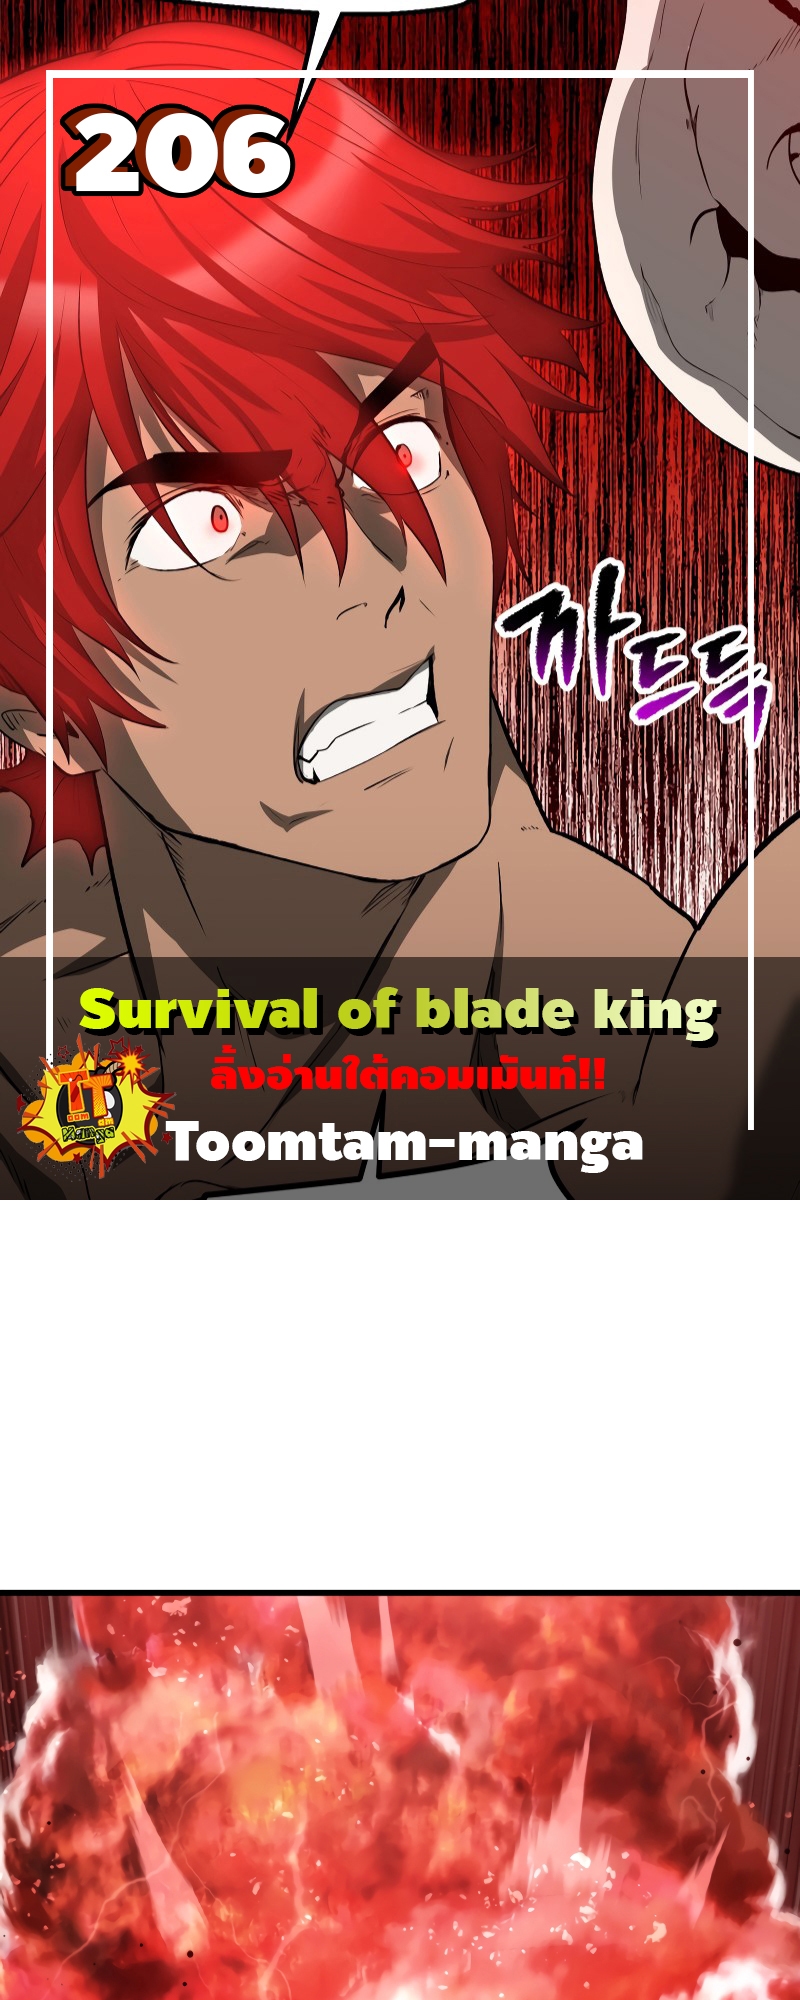 Survival of blade king 206 18 05 25670001